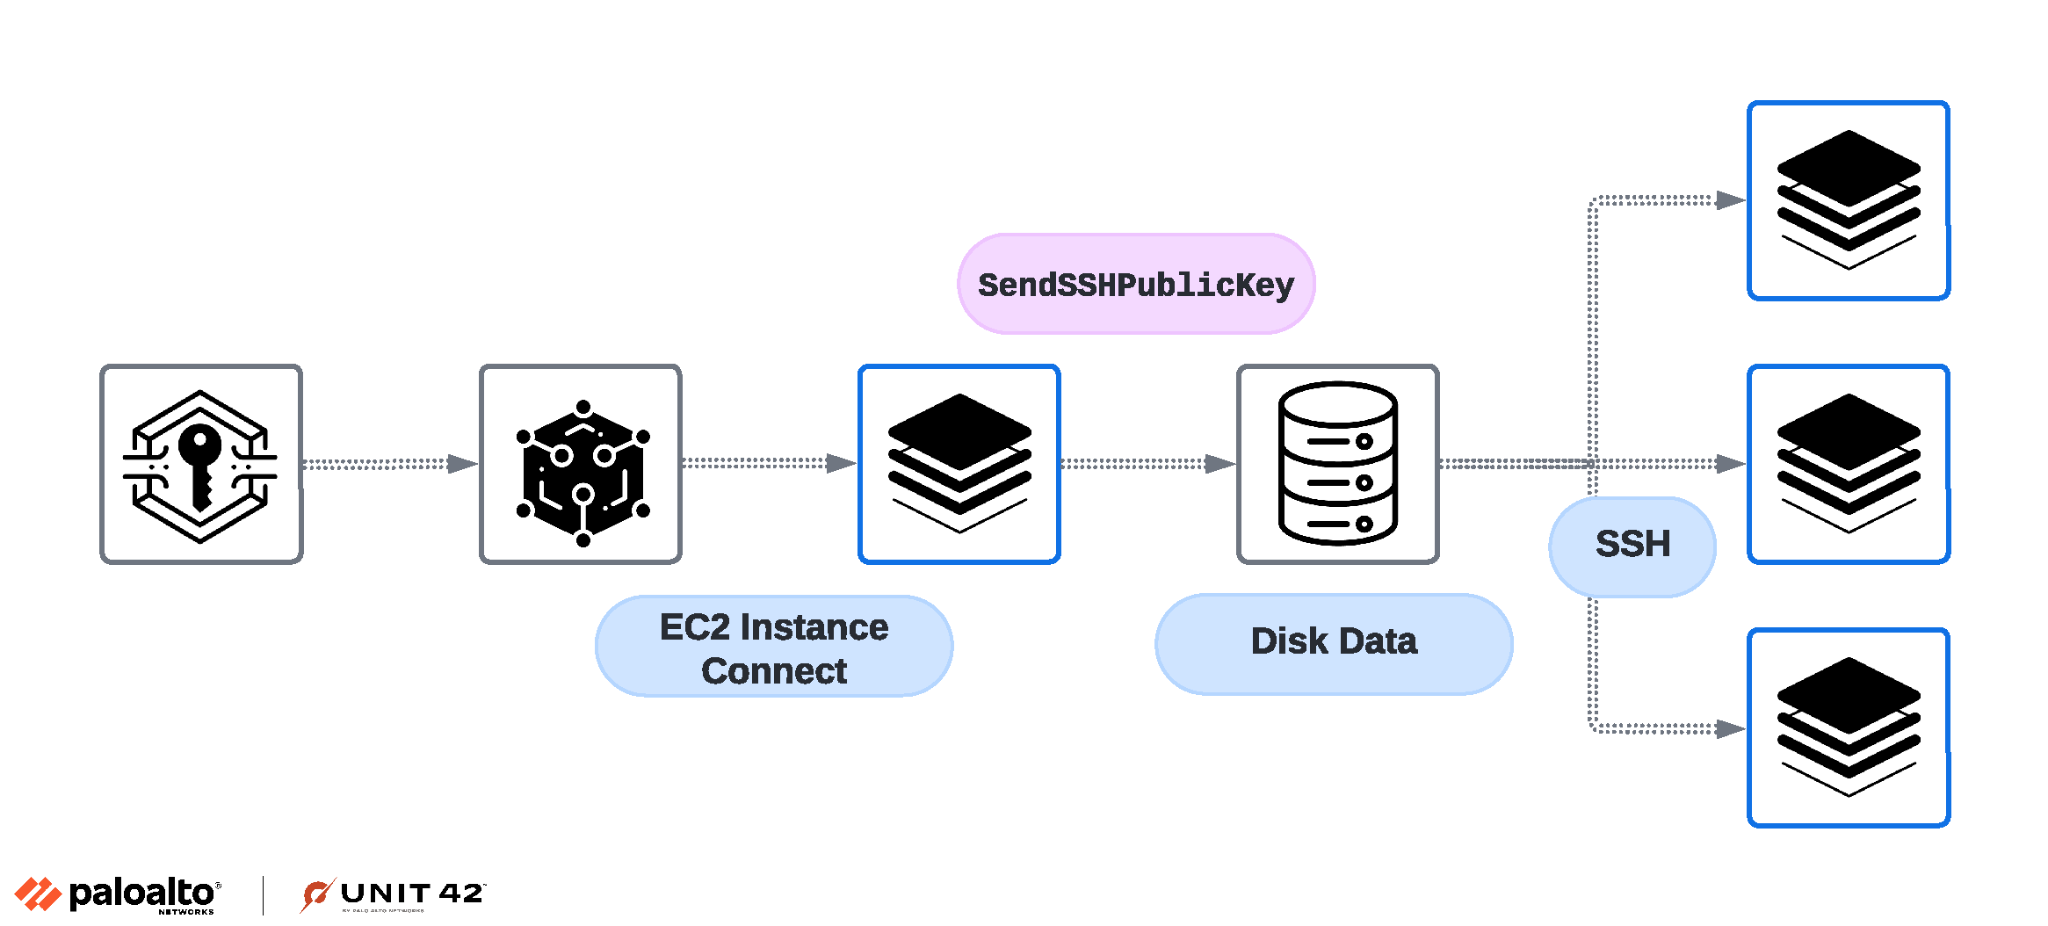 Image 4 is a tree diagram of how the EC2 Instance Connect service is used for SSH key injection. Key > Icon of data > Icon of server > Icon of disk data. Disk data branches into three servers labeled SSH. 